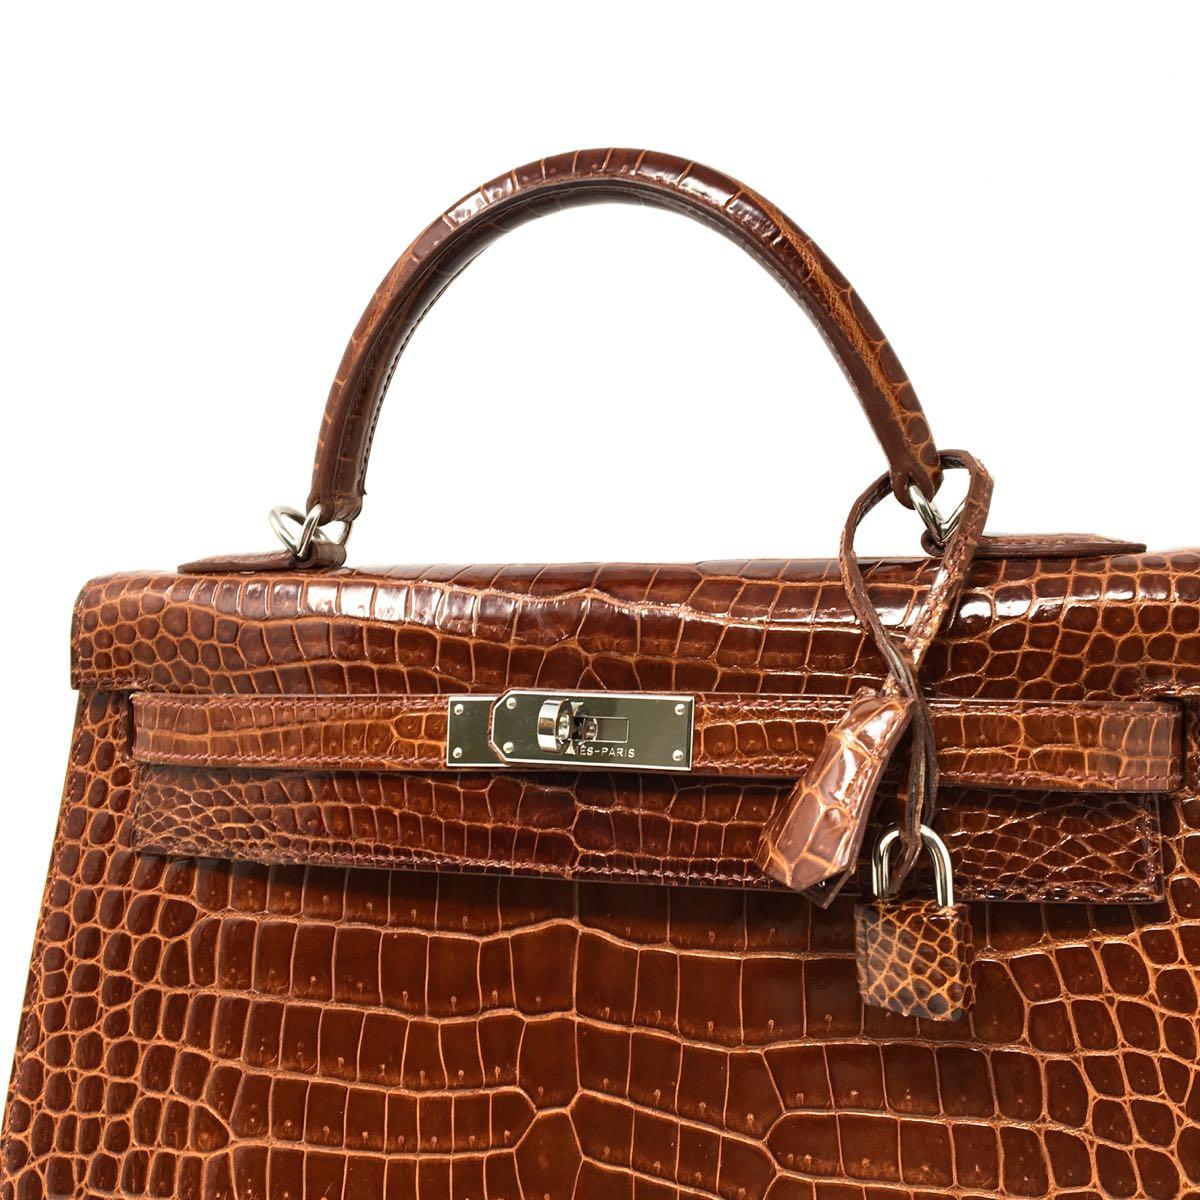 Hermes Sac Kelly 32 Sellier Croco Porosus Miel Leather. Silver hardware. The interior is in brown smooth lamb leather with three flat pockets.   Stamp M, year 2009. Included : Zipper, clochette, keys padlocks and envoice.  In very good condition.